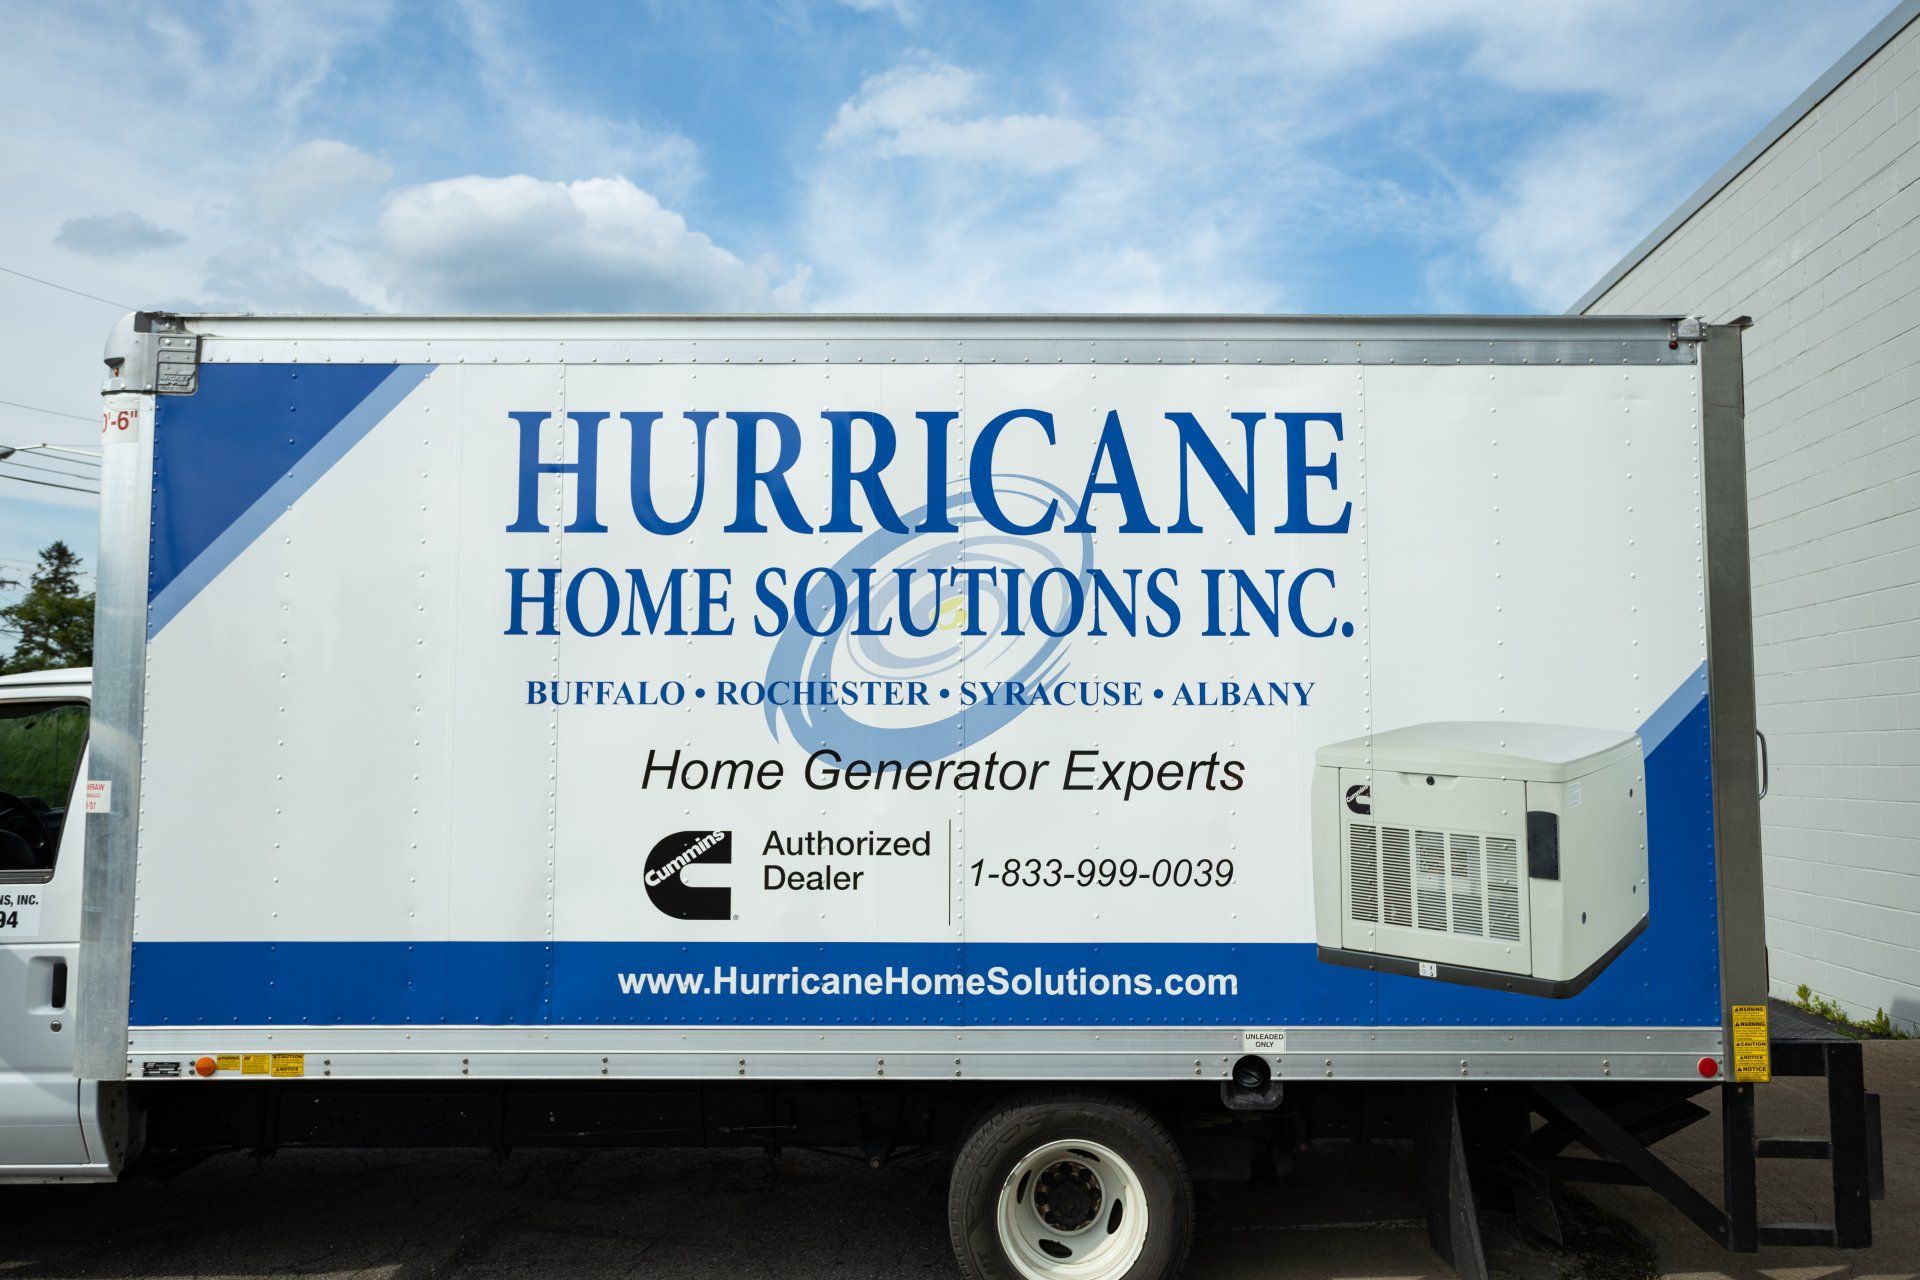 Images of trucks, generators, and the HHS team